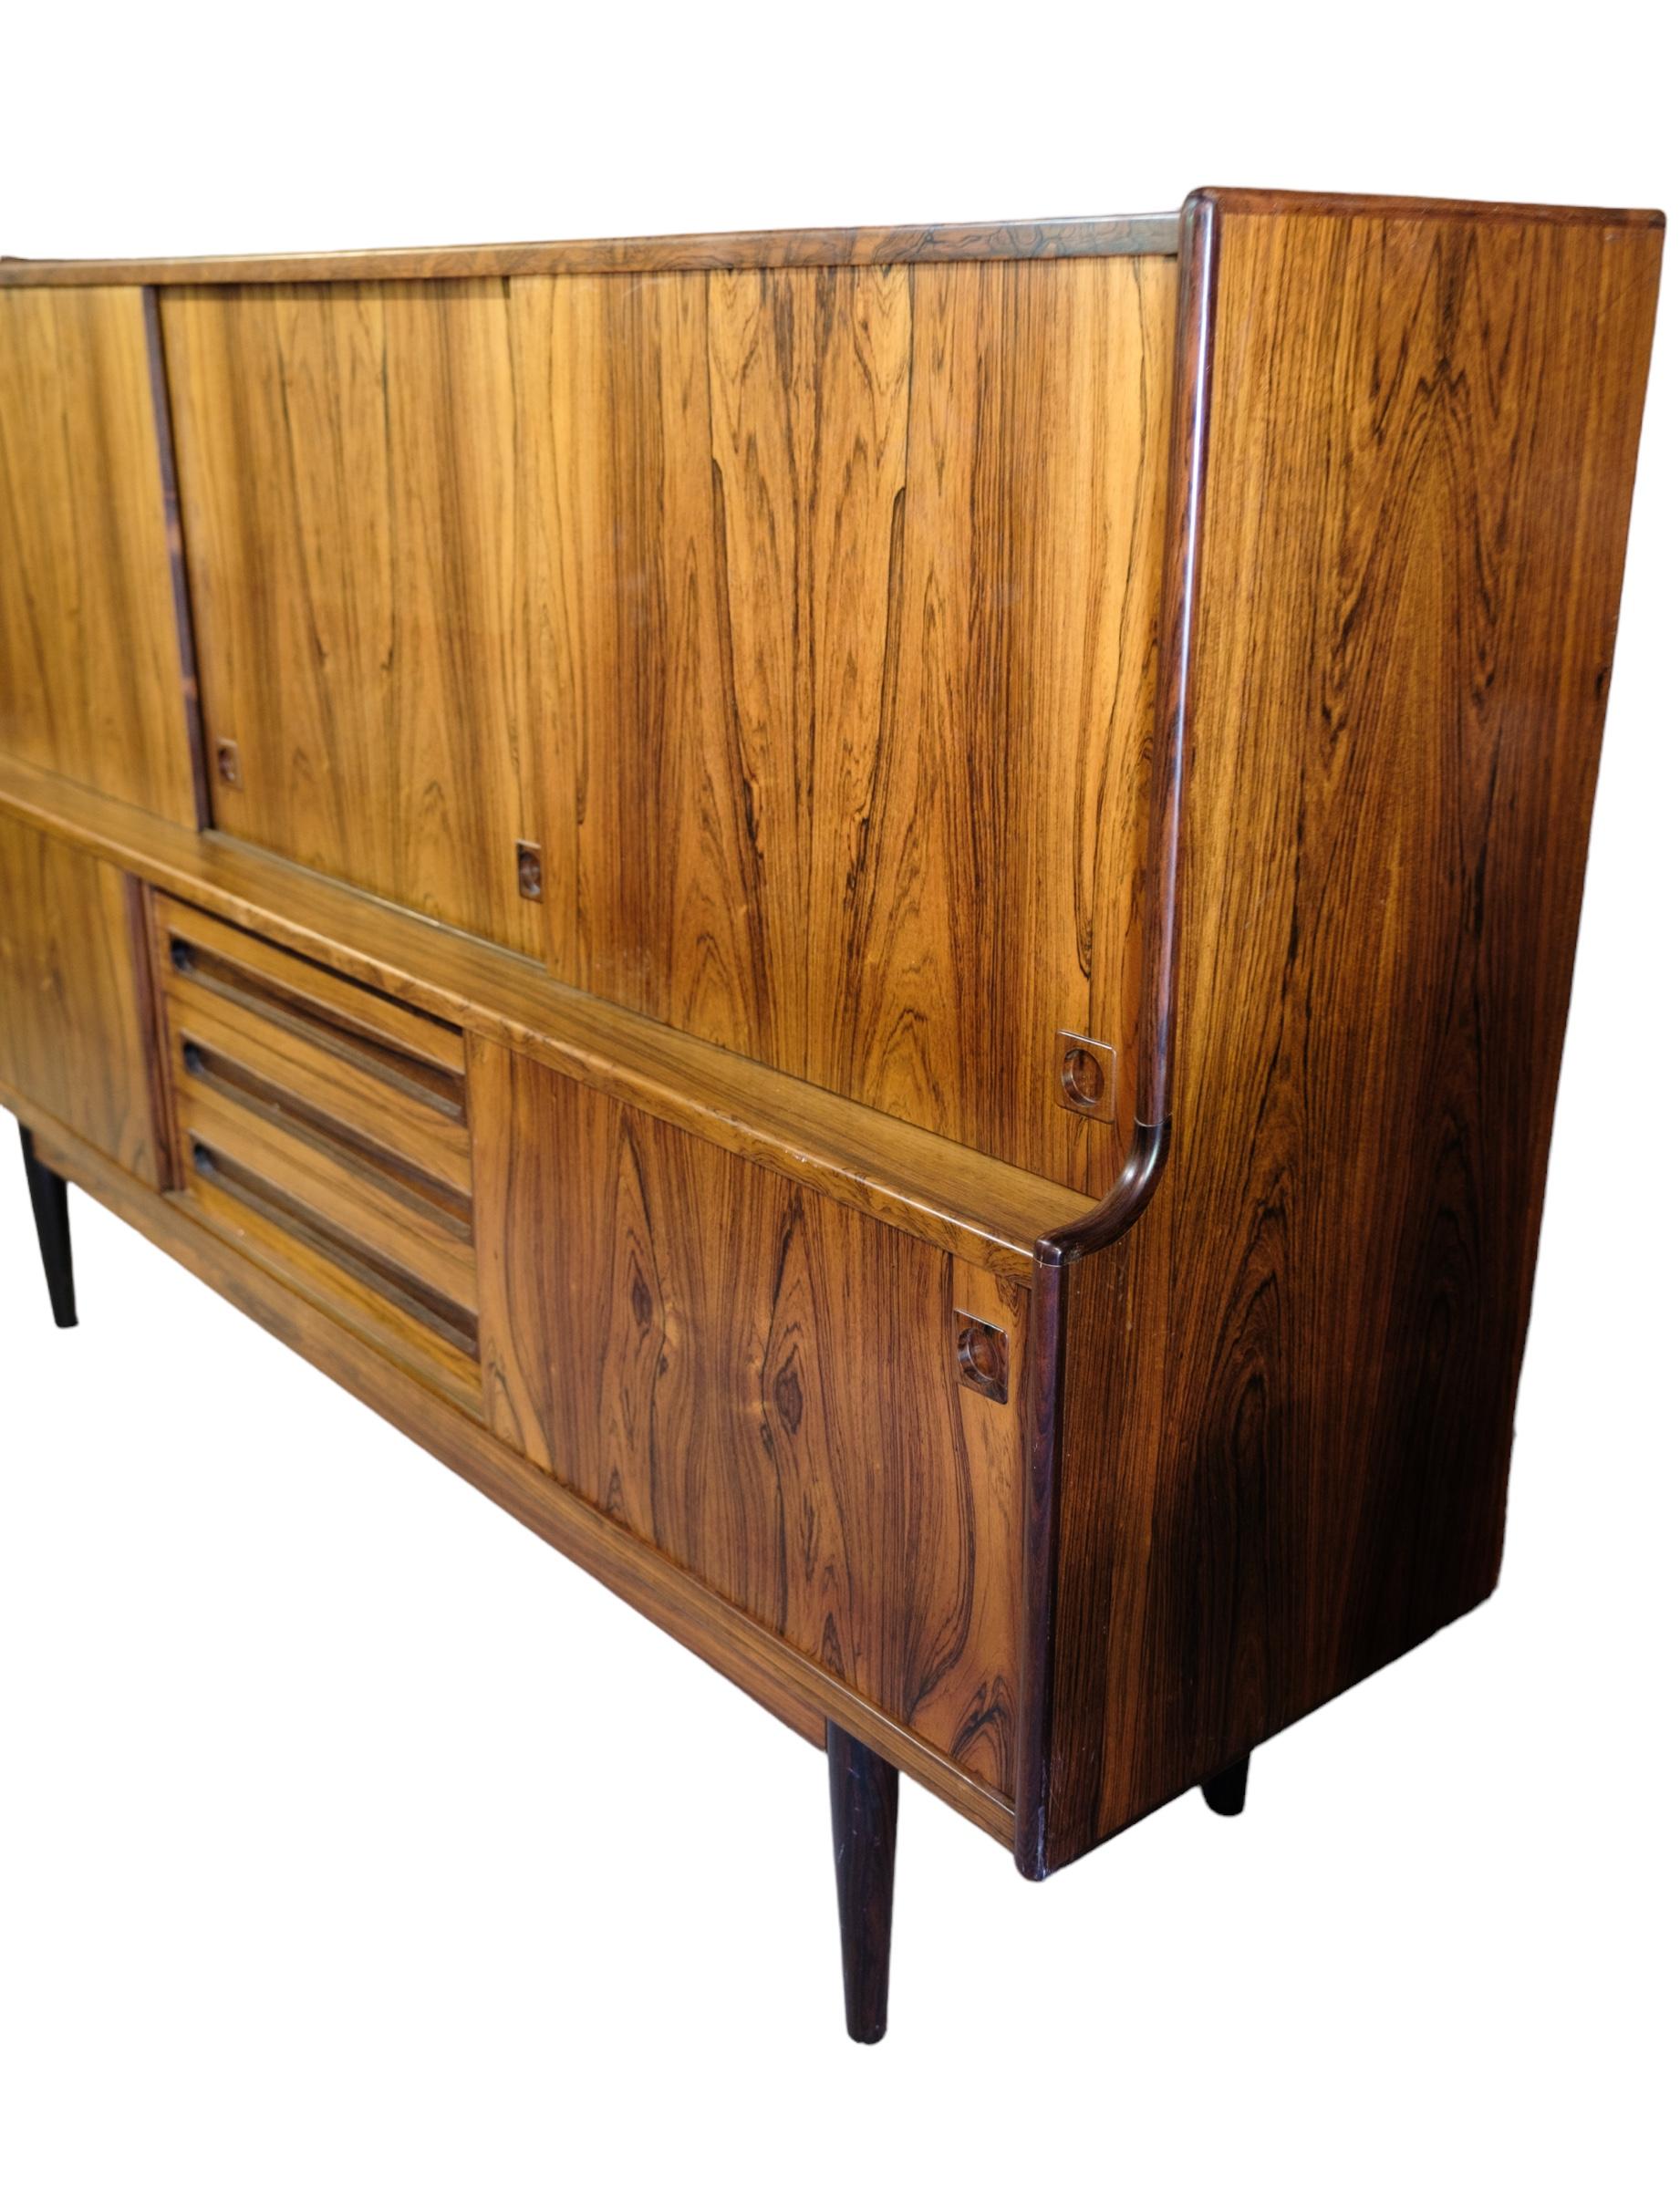 Mid-Century modern high sideboard in rosewood, designed by Johannes Andersen, manufactured by Skaaning Møbelfabrik from around the 1960s.
Measurements in cm: H:128 W:200 D:42